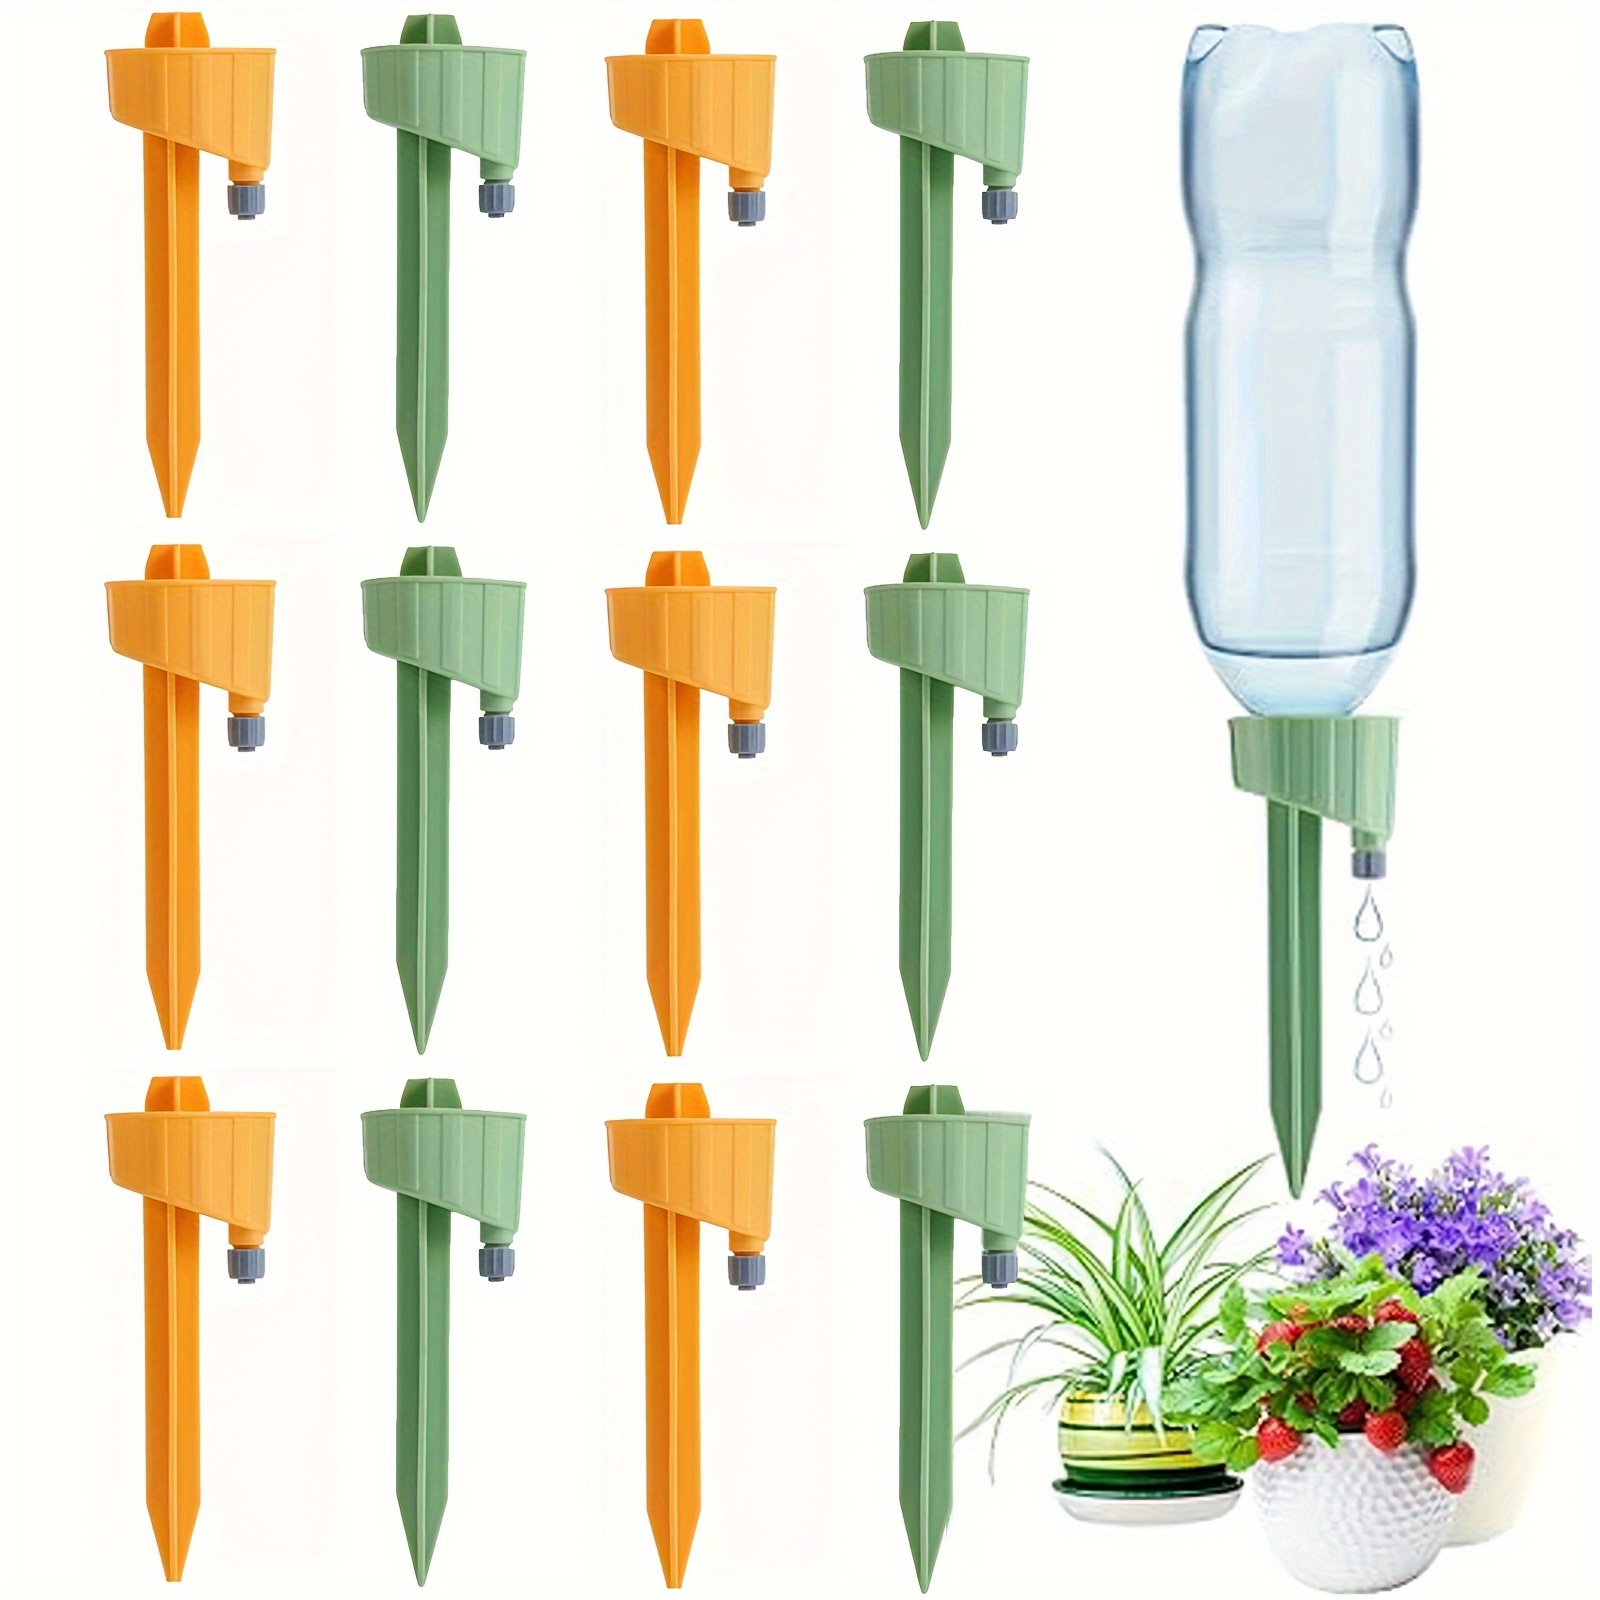 

Plant Watering Spikes Set Of 2/4/8/12 – Universal Fit, Self-watering Drip Irrigation Stakes For Indoor And Outdoor Potted Plants, Adjustable Flow Rate, Plastic, No Battery Needed, Fits European And